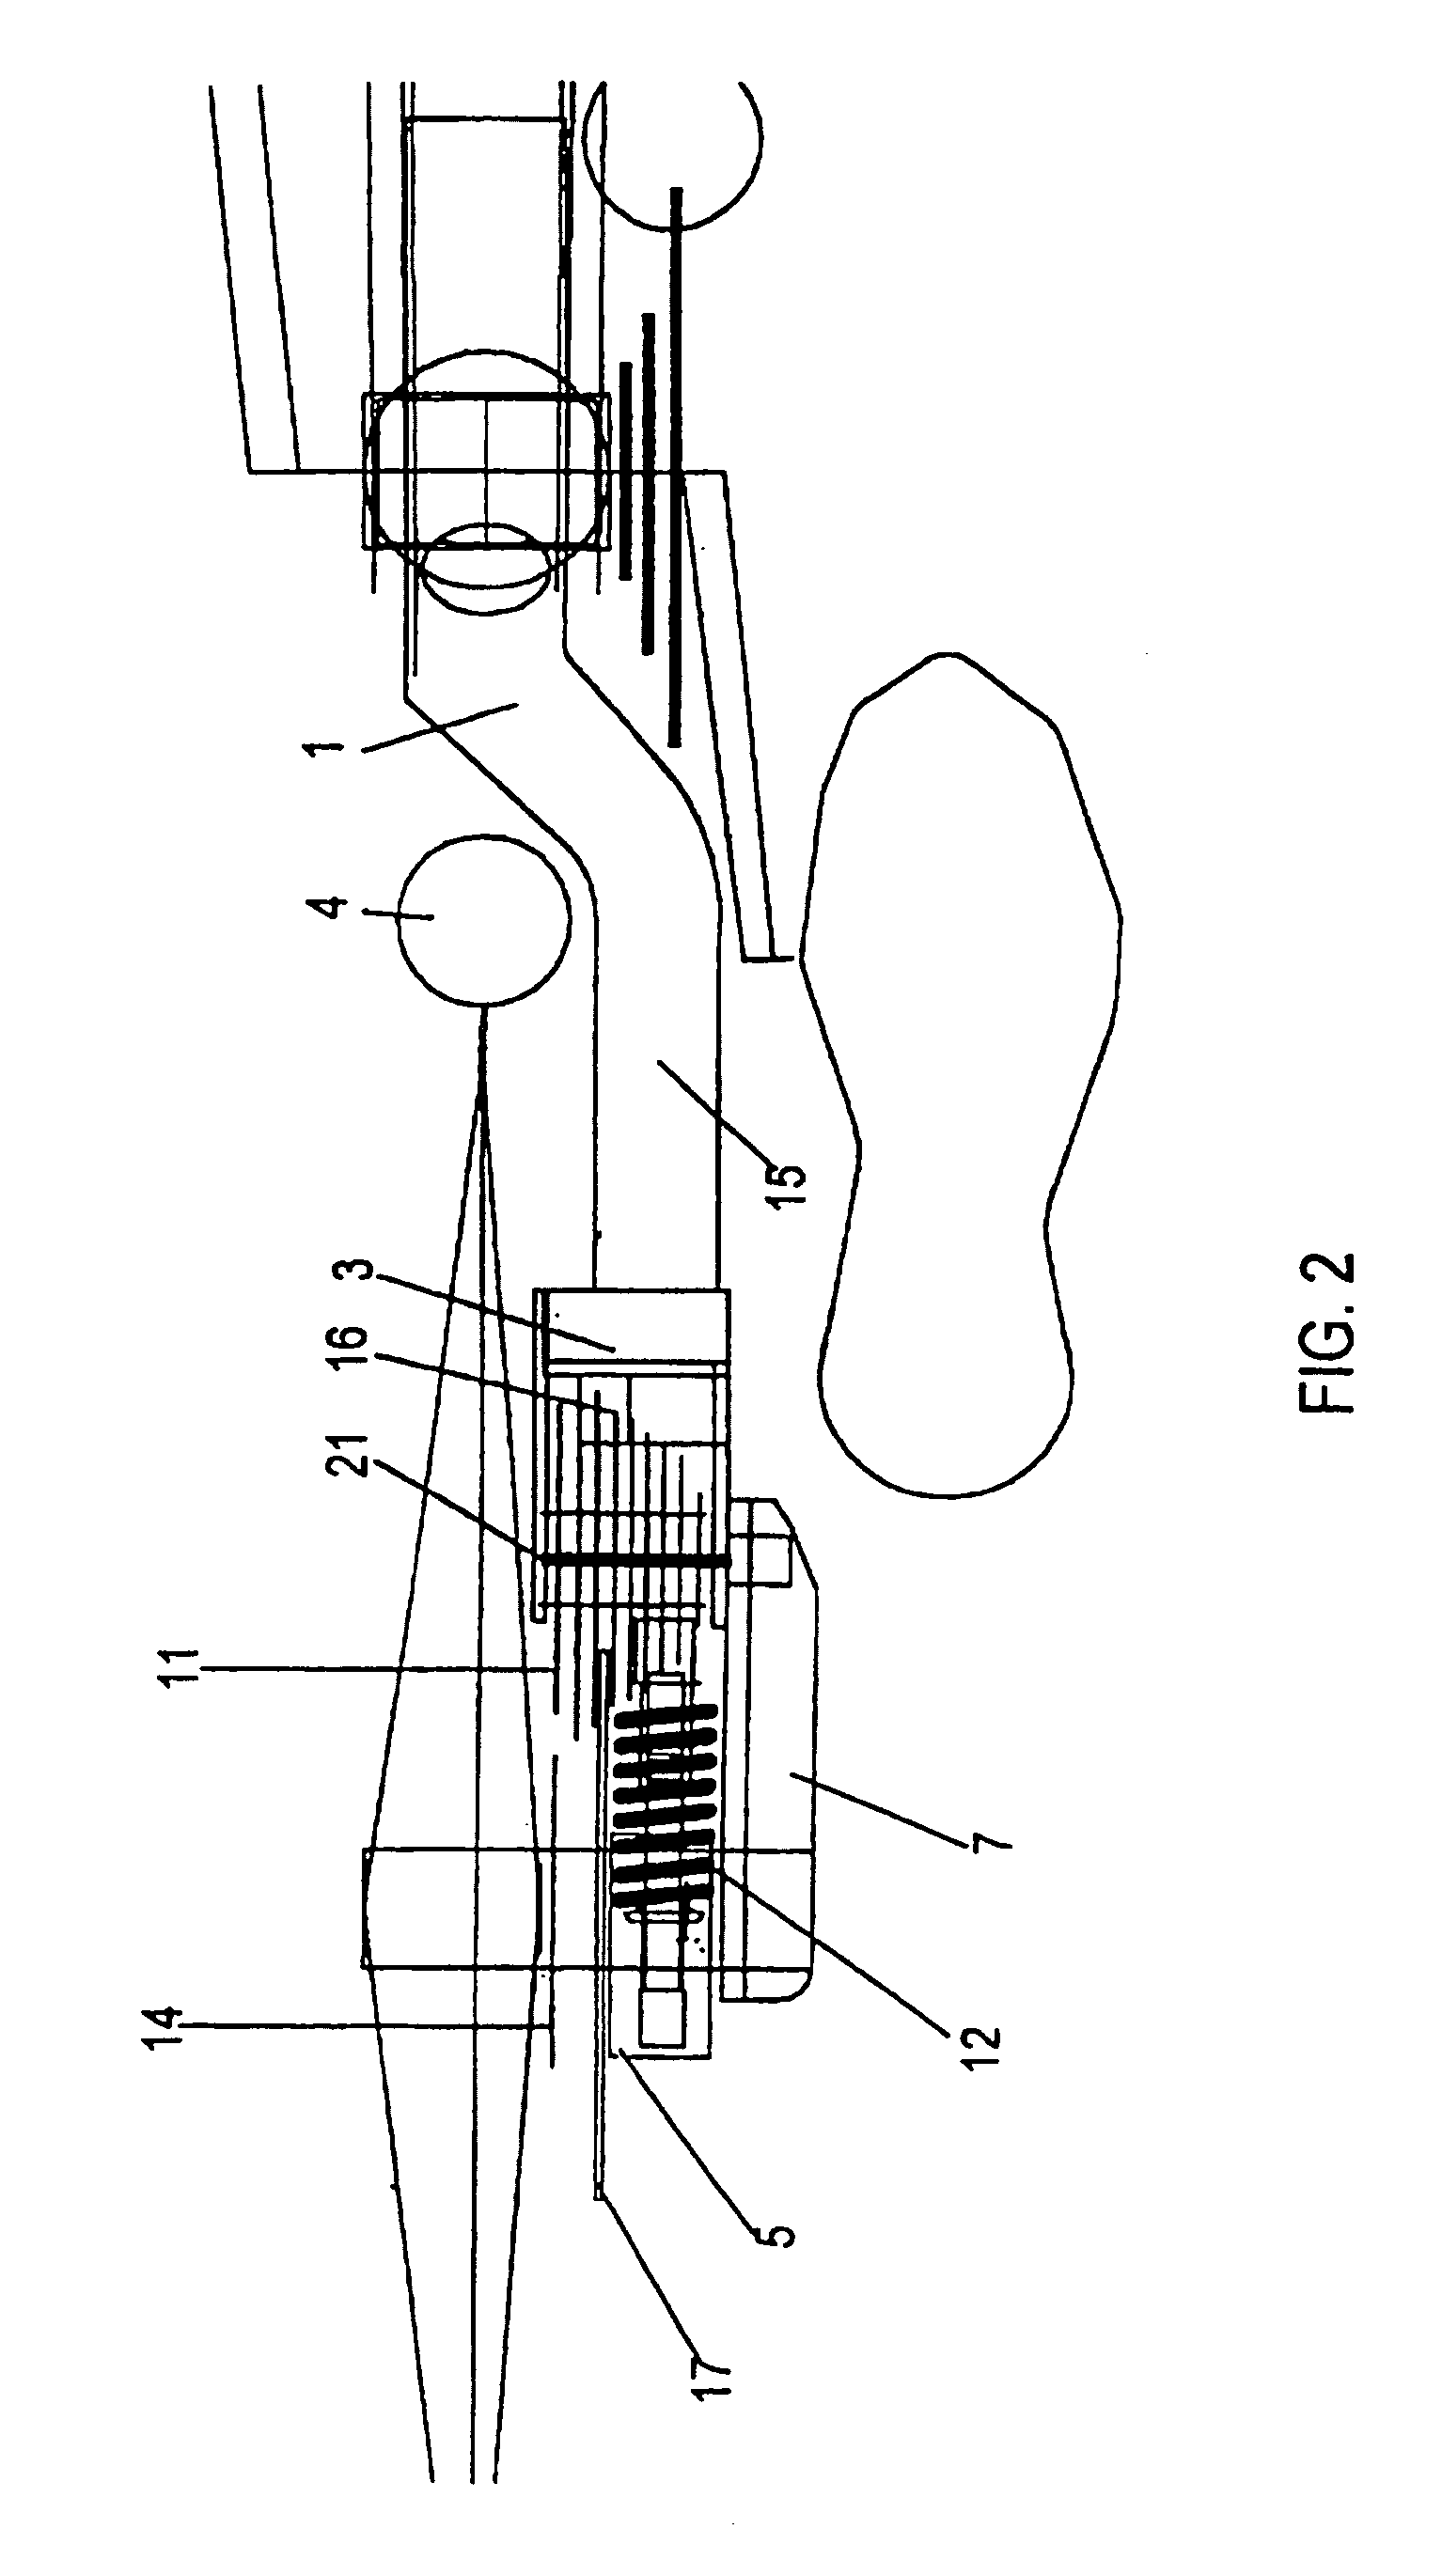 All-suspension bicycle frame with isolated drive gear